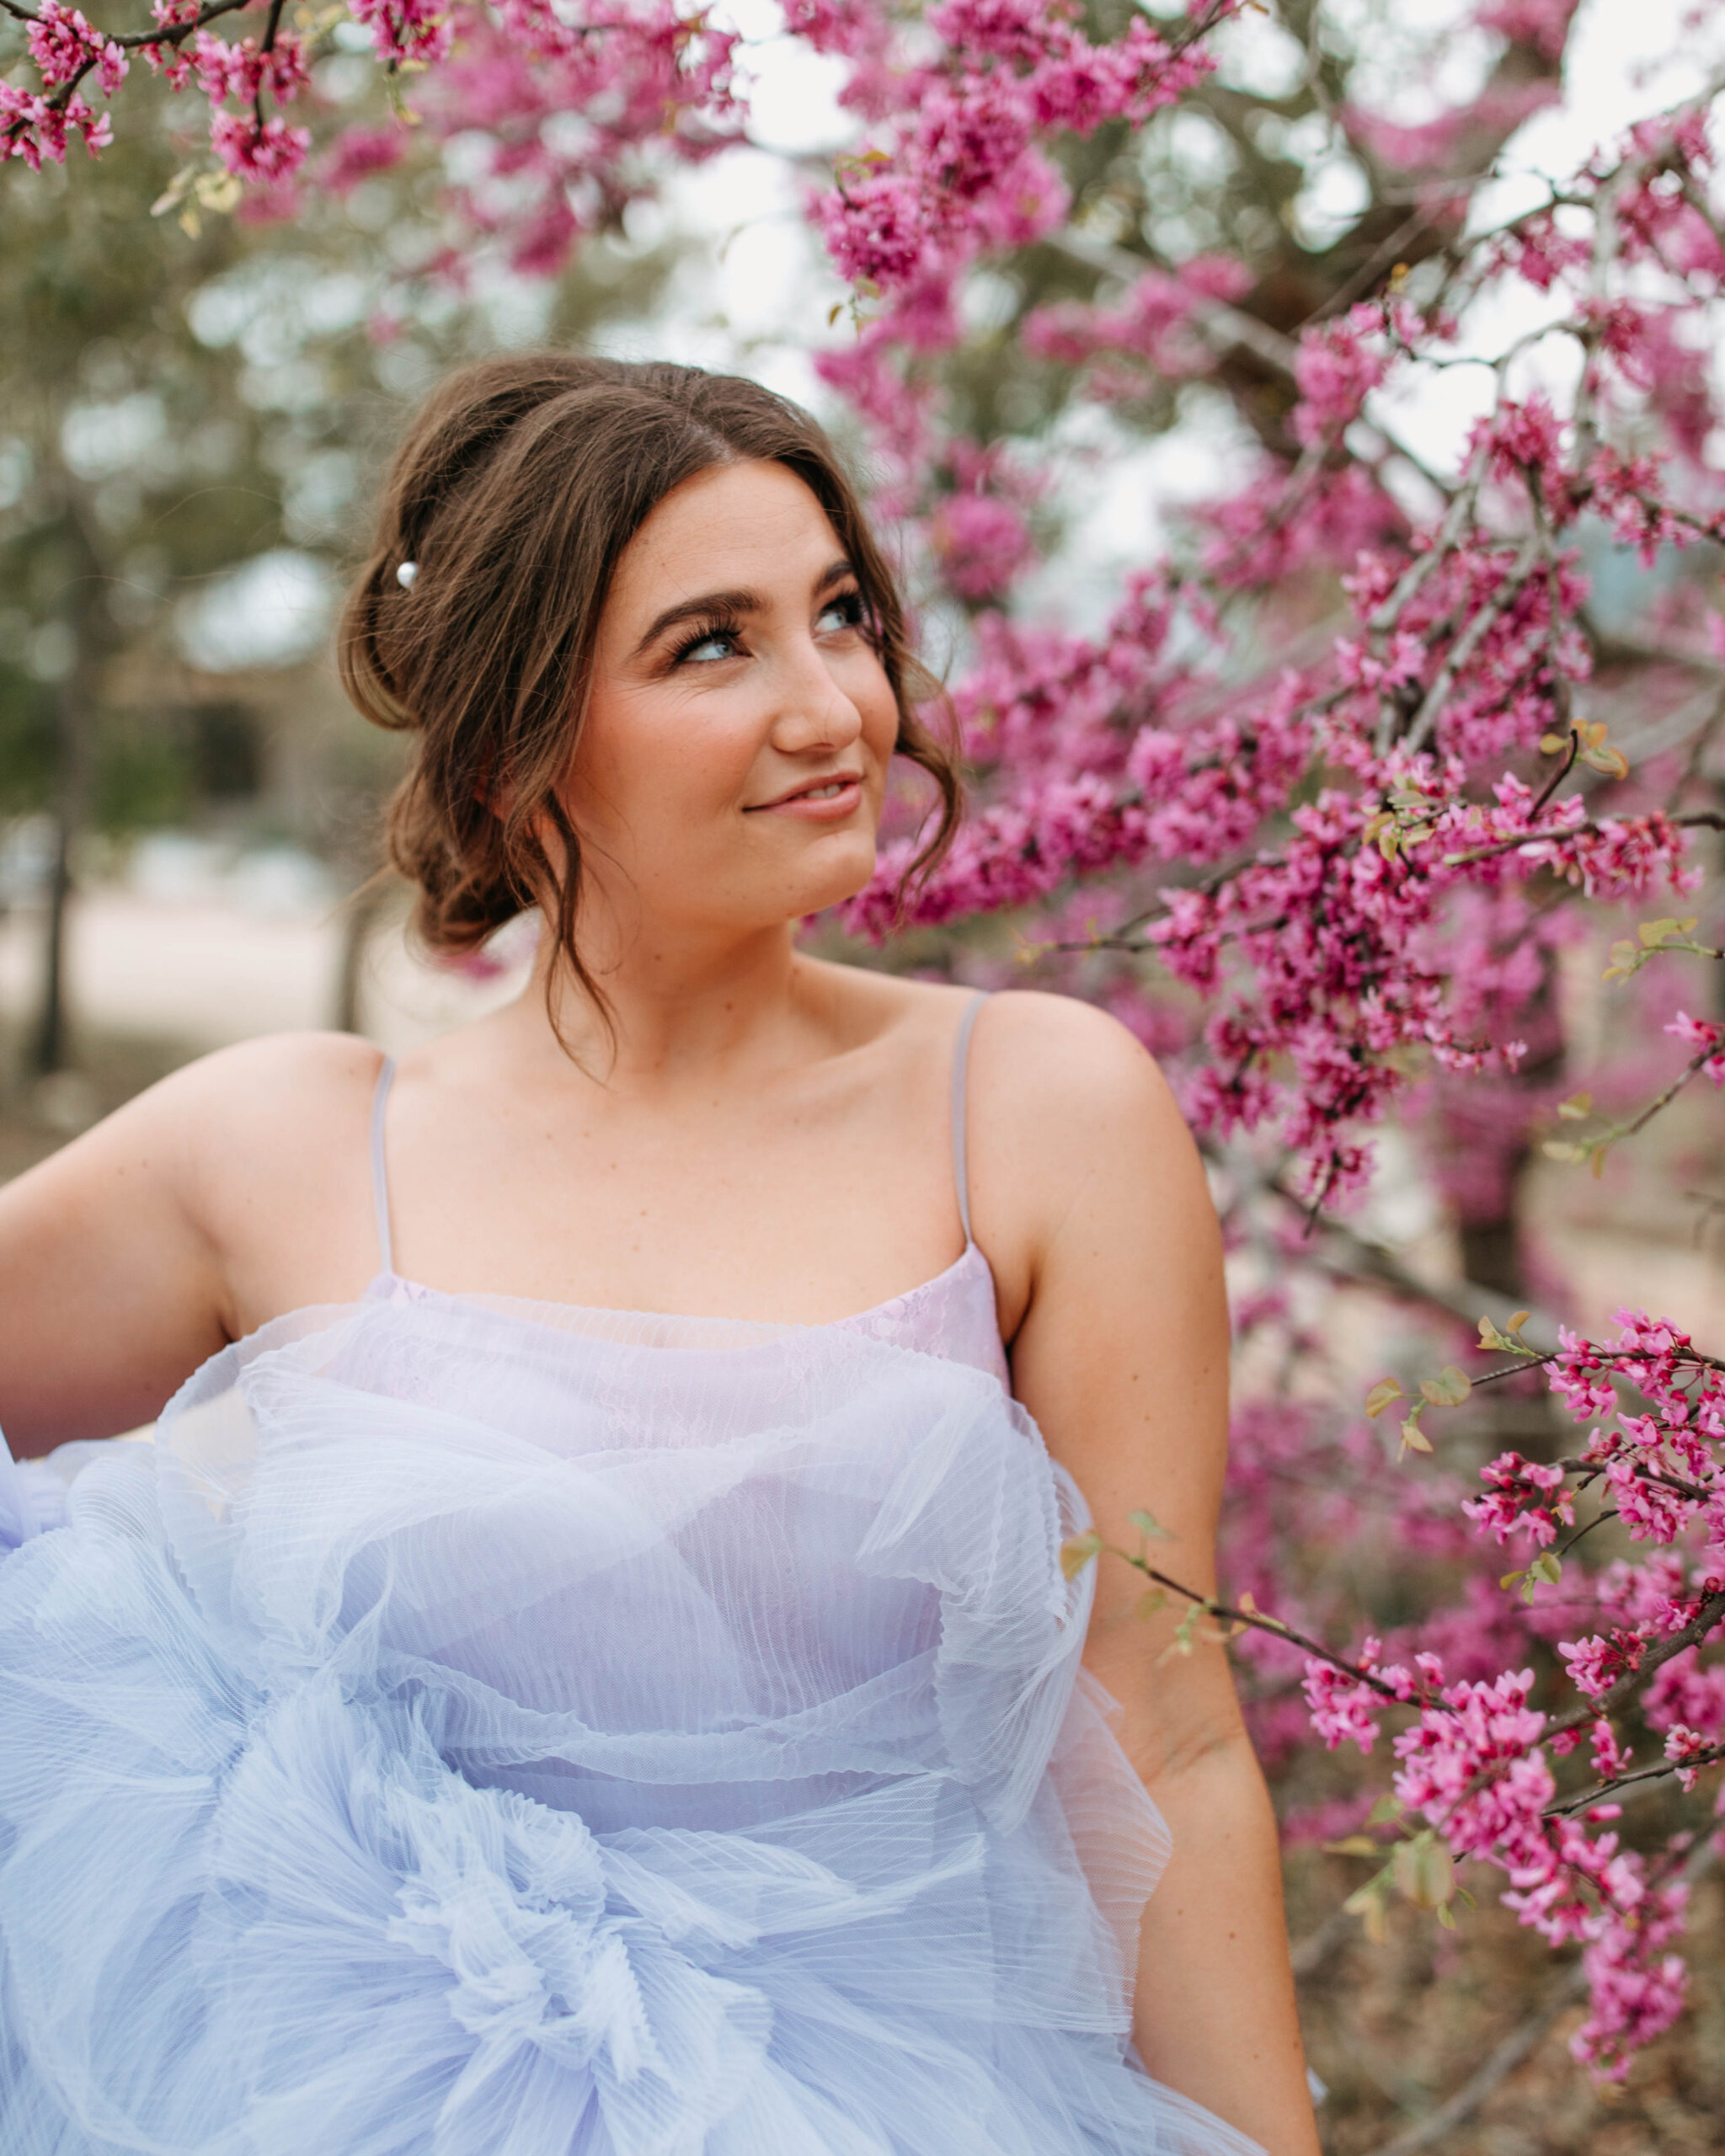 Bridal Portraits in the Spring in front of Blossoms. A spring wedding Inspiration photo.